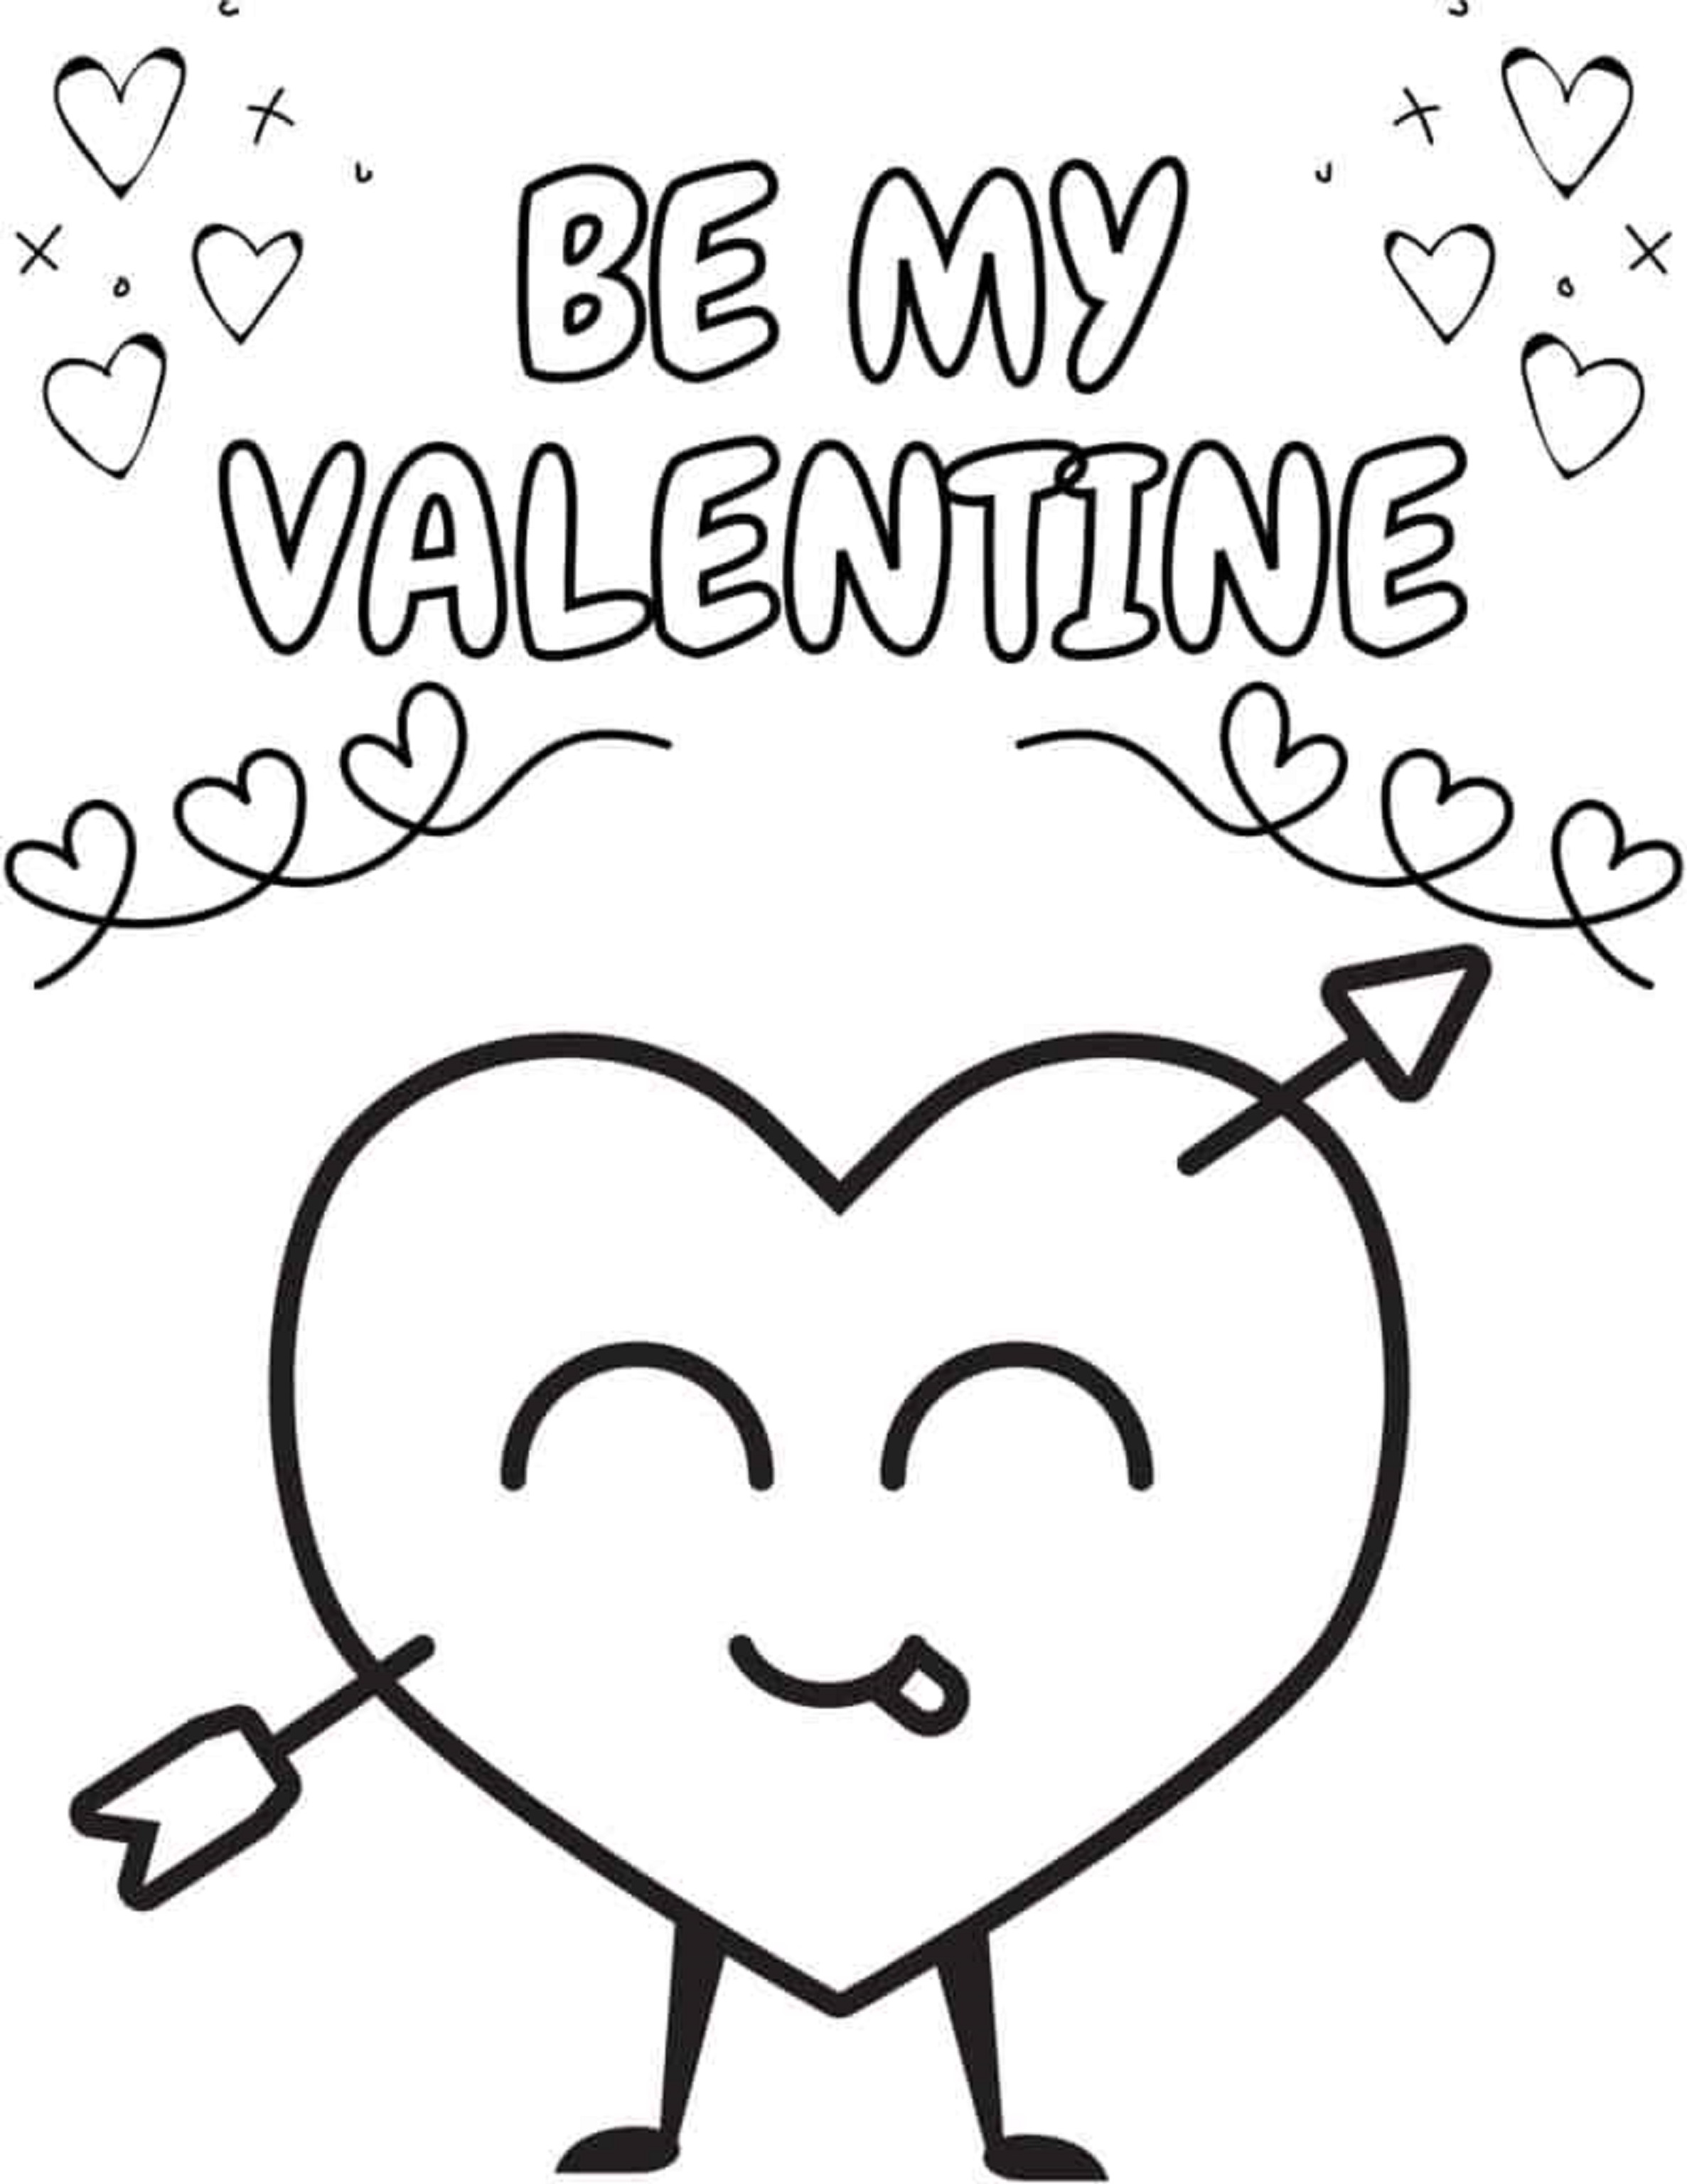 Printable Valentine Coloring Pages Pdf Free - Be My Valentine Coloring Pages Free